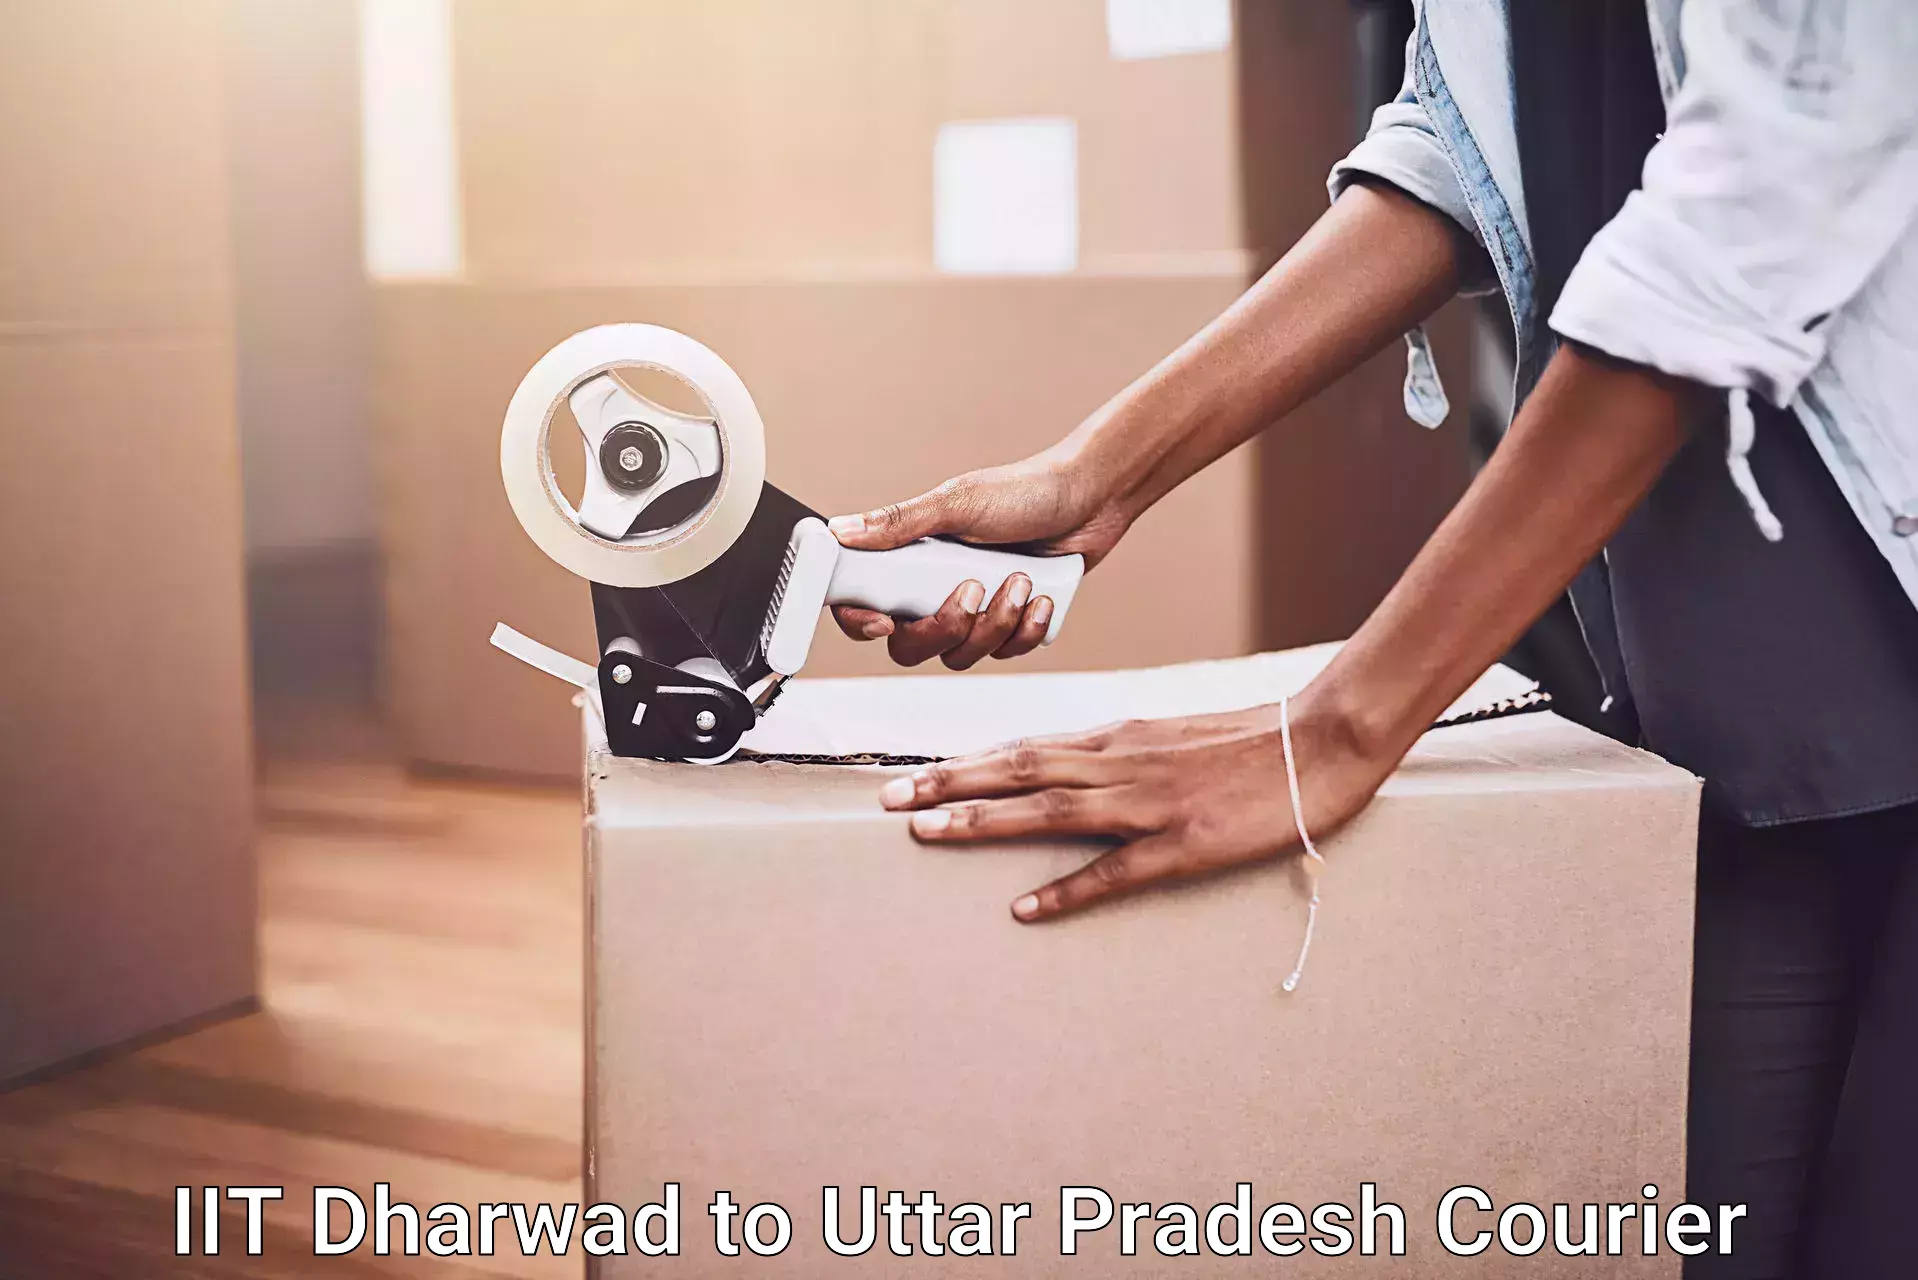 Efficient relocation services in IIT Dharwad to Khalilabad